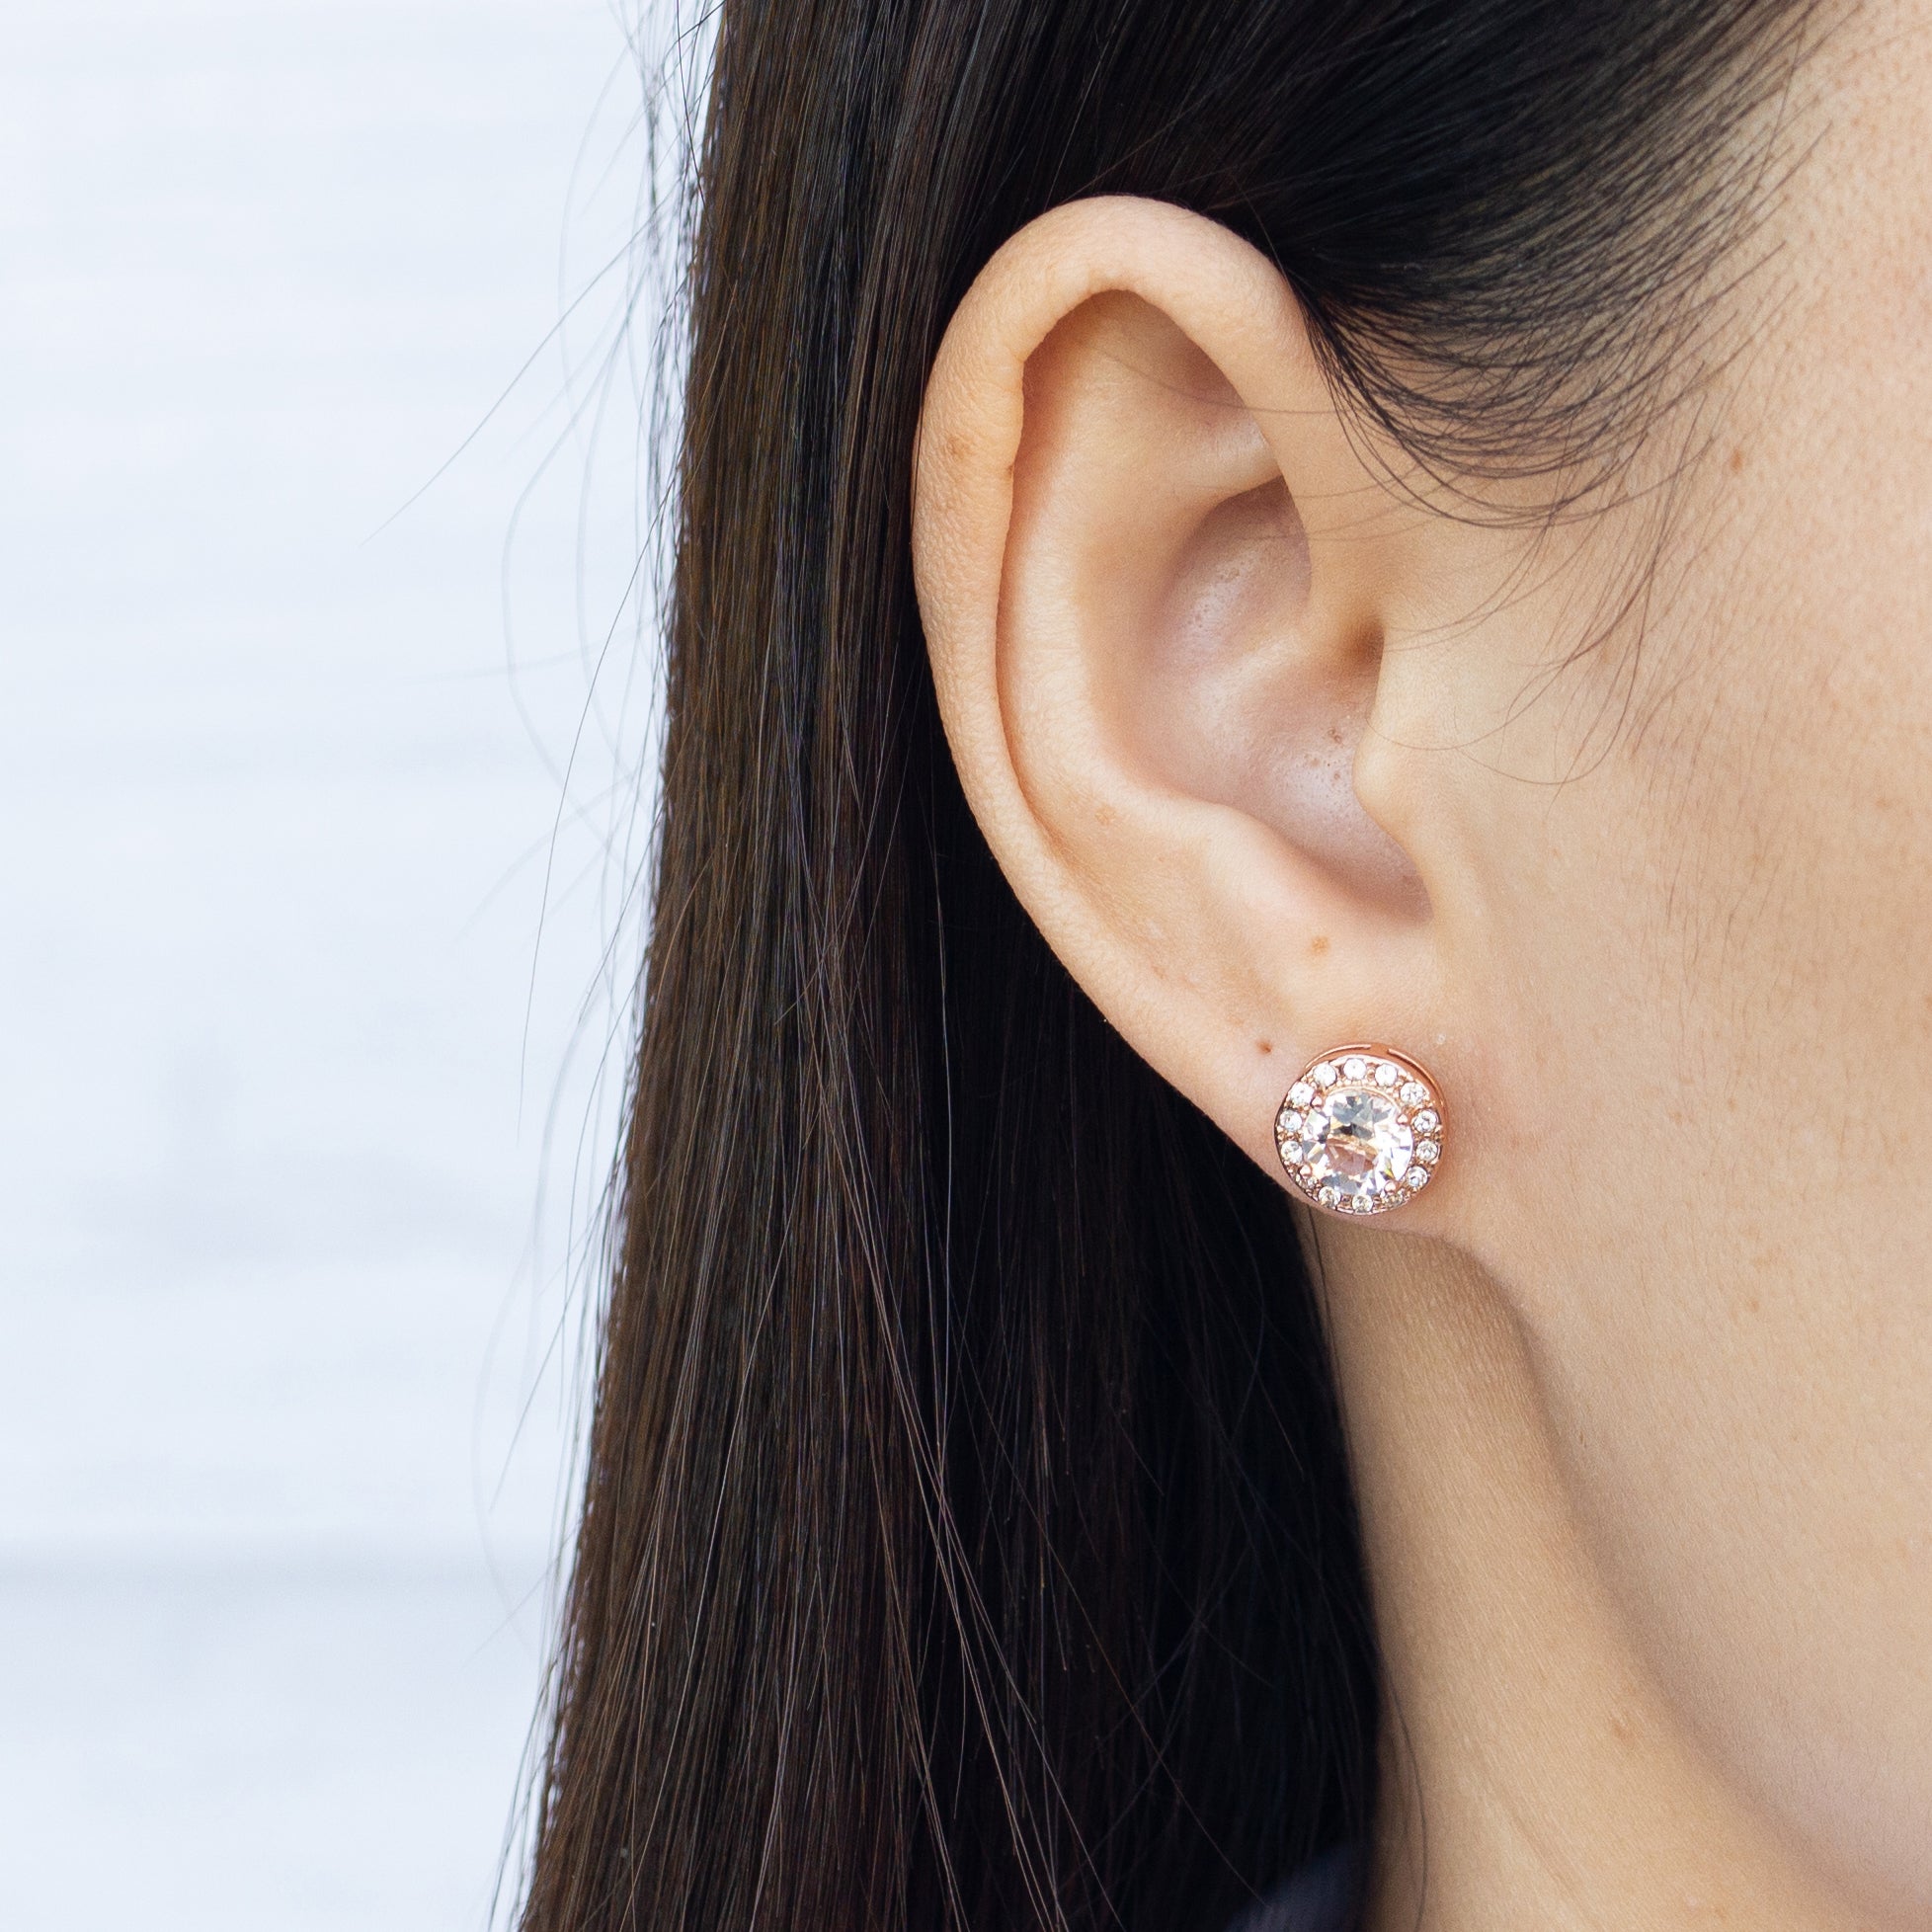 Rose Gold Plated Halo Earrings Created with Zircondia® Crystals